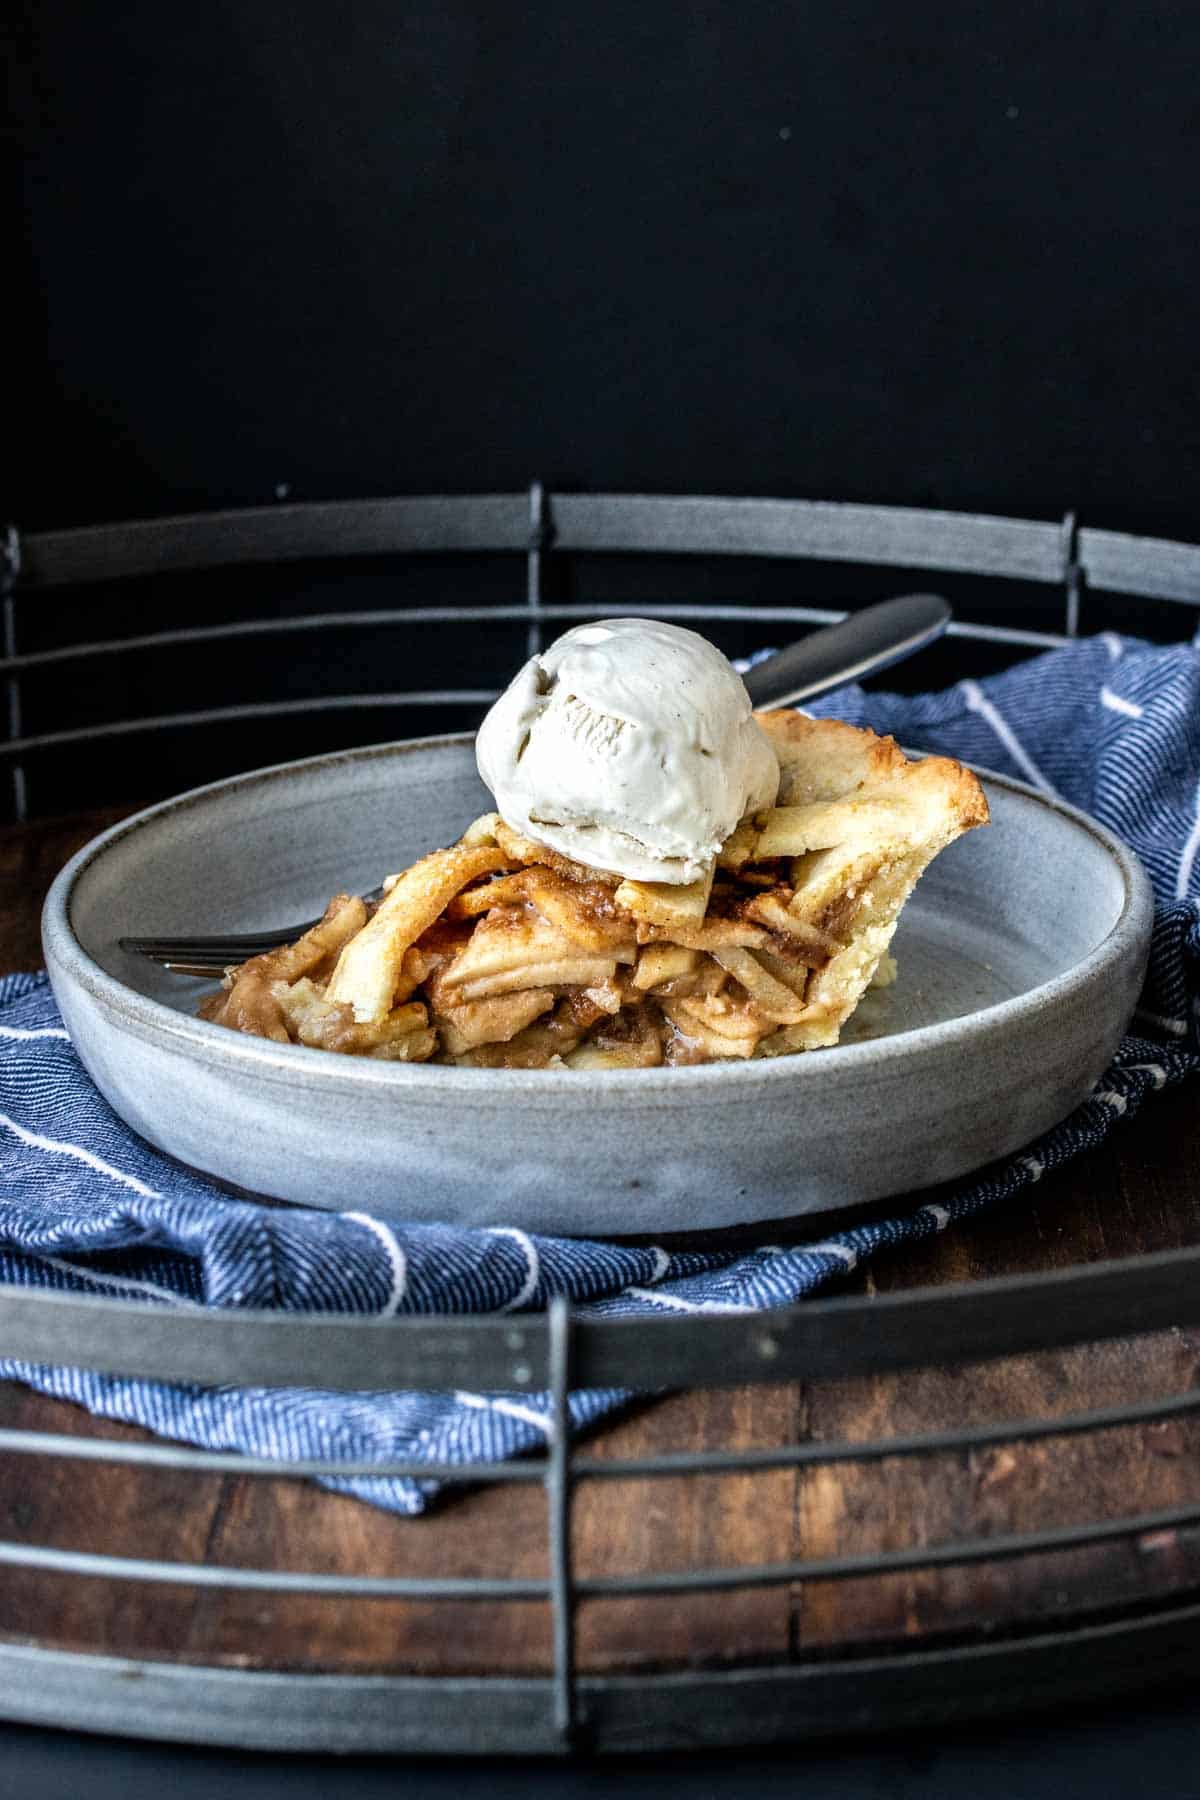 A piece of apple pie topped with ice cream on a grey plate